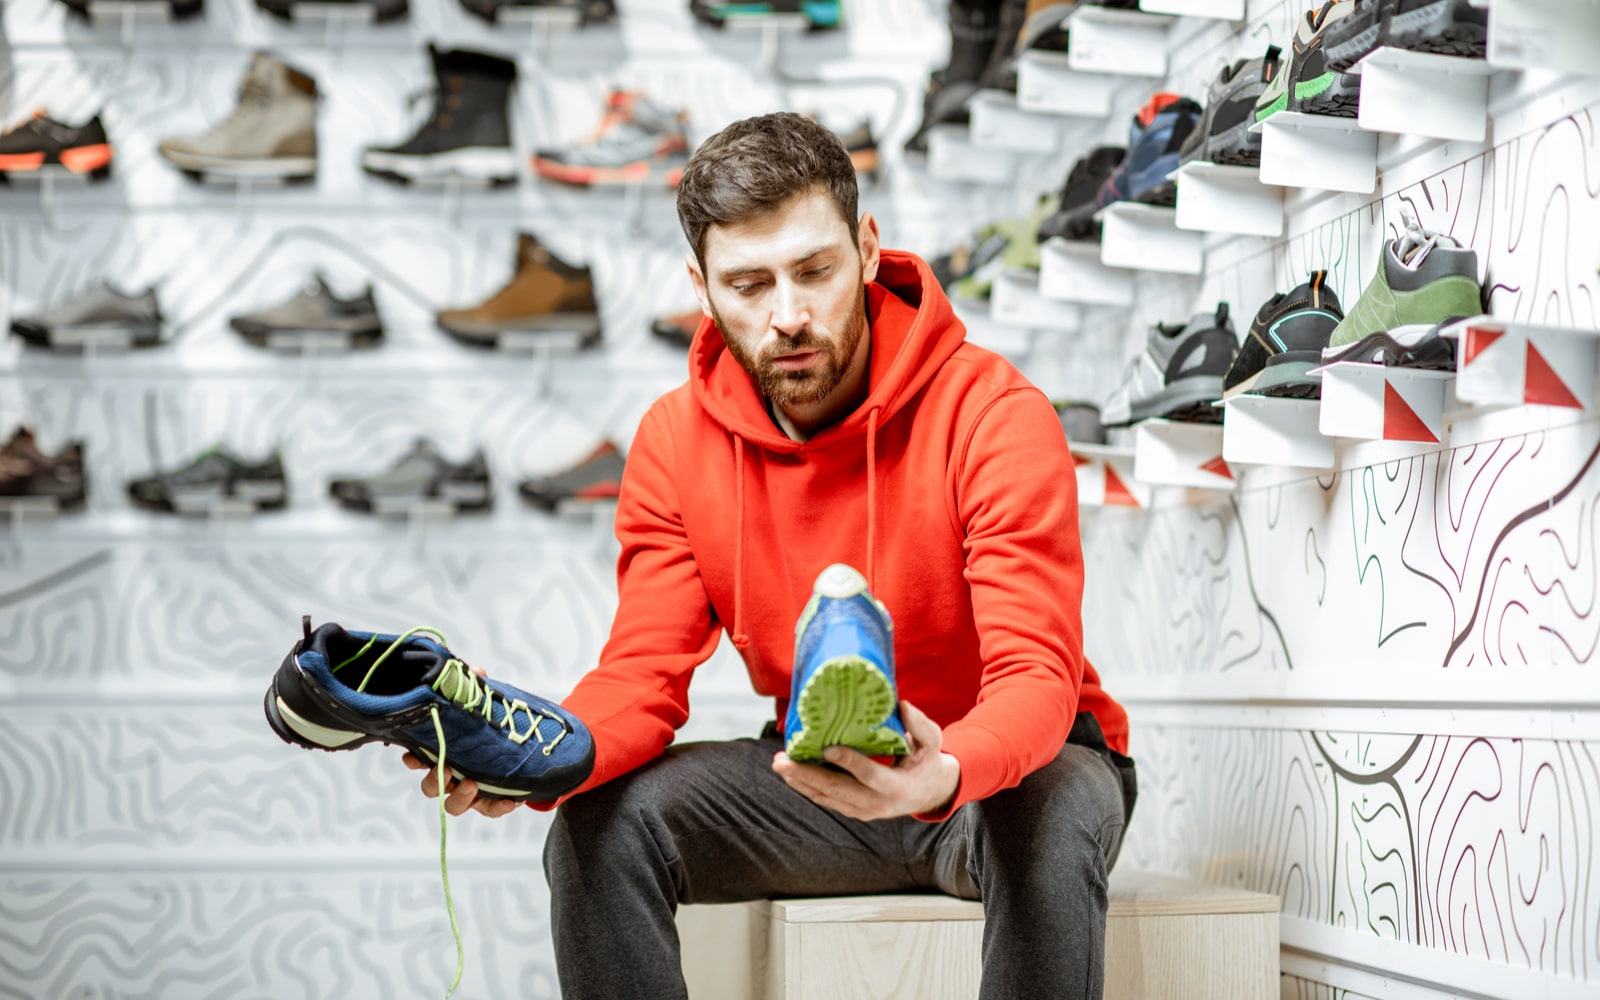 Man trying to select a shoe